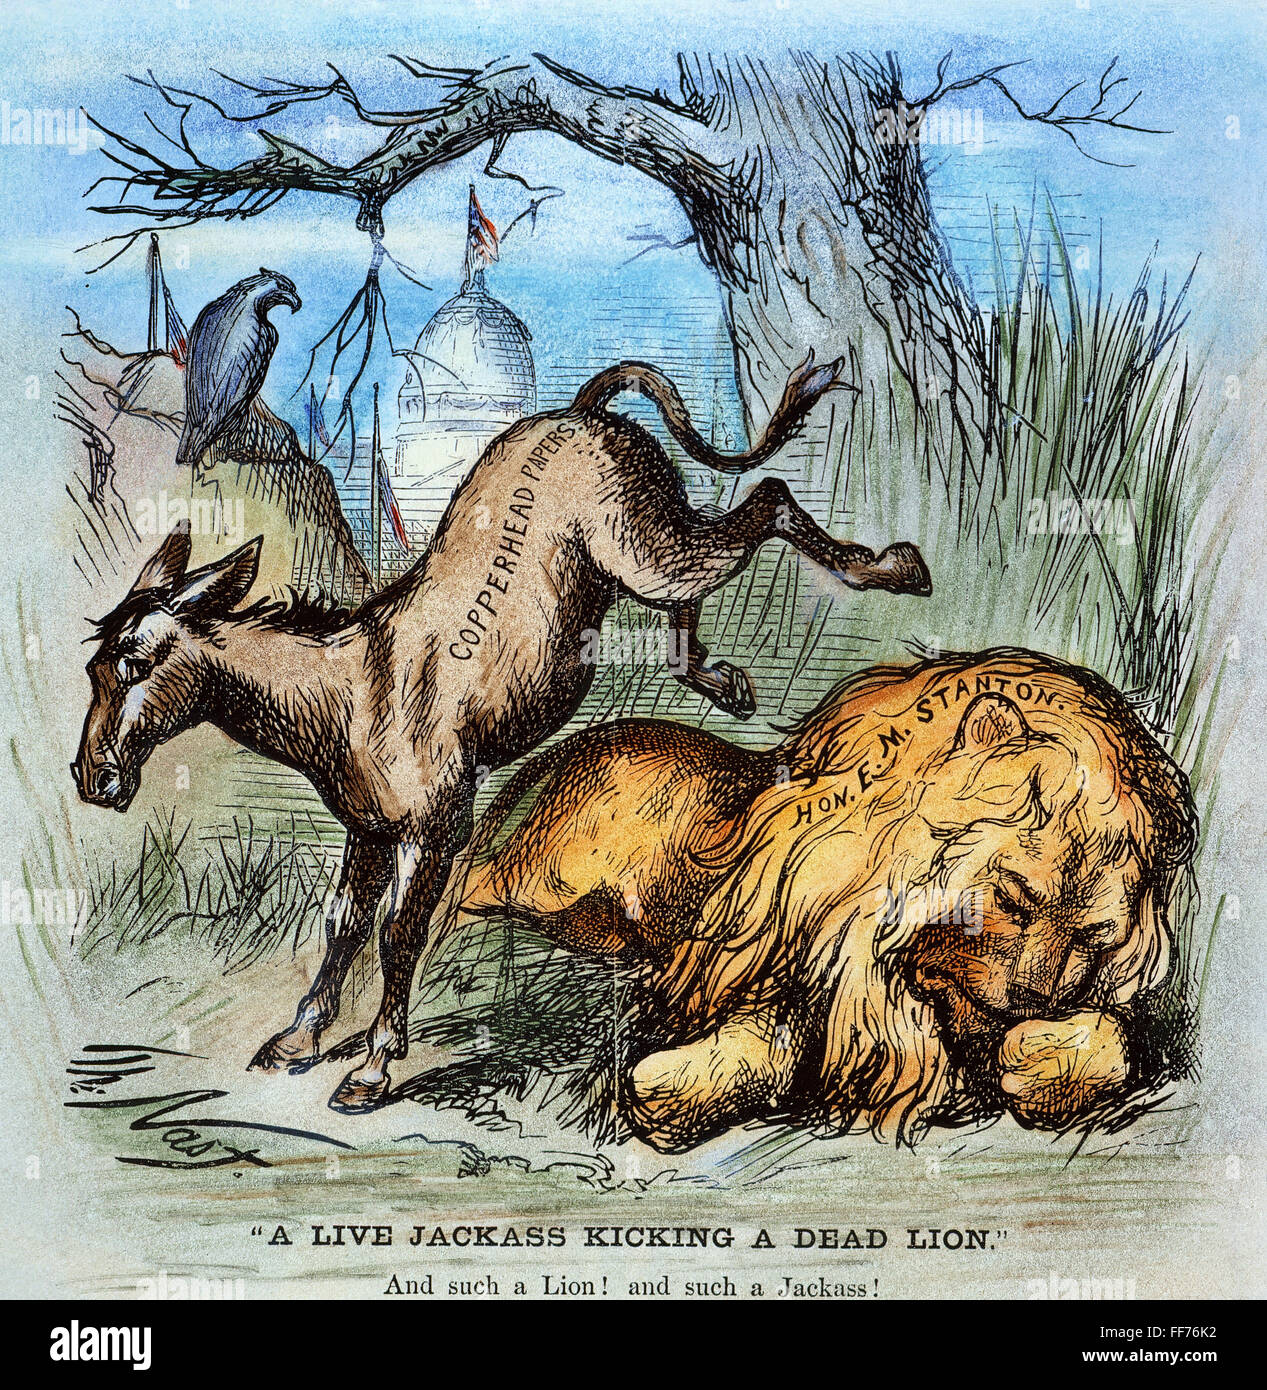 DEMOCRAT DONKEY, 1870. /n'A Live Jackass Kicking a Dead Lion.' American cartoon, 1870, by Thomas Nast, featuring his first use of the donkey as the symbol of the Democratic Party, shown kicking the late Republican Secretary of War Edwin Stanton. Stock Photo